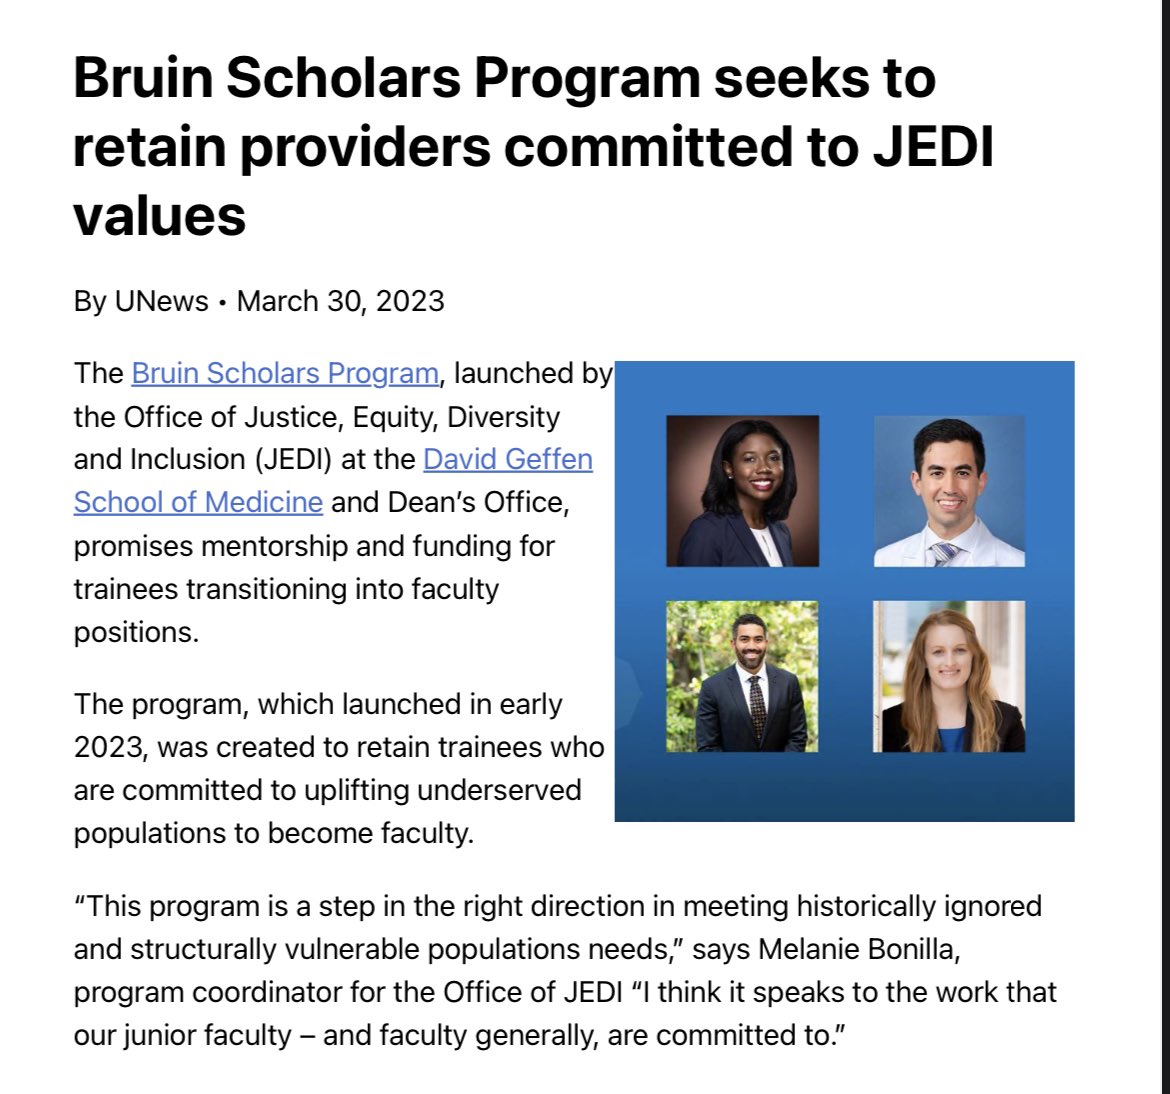 Beyond thrilled to be joining @UclaUrology and @yourMLKCH team this fall. From @DoT_UMMS at @UMichMedSchool to incredible mentorship and support for DEI work at @UMichUrology, excited to continue serving in this space at @UCLAHealth